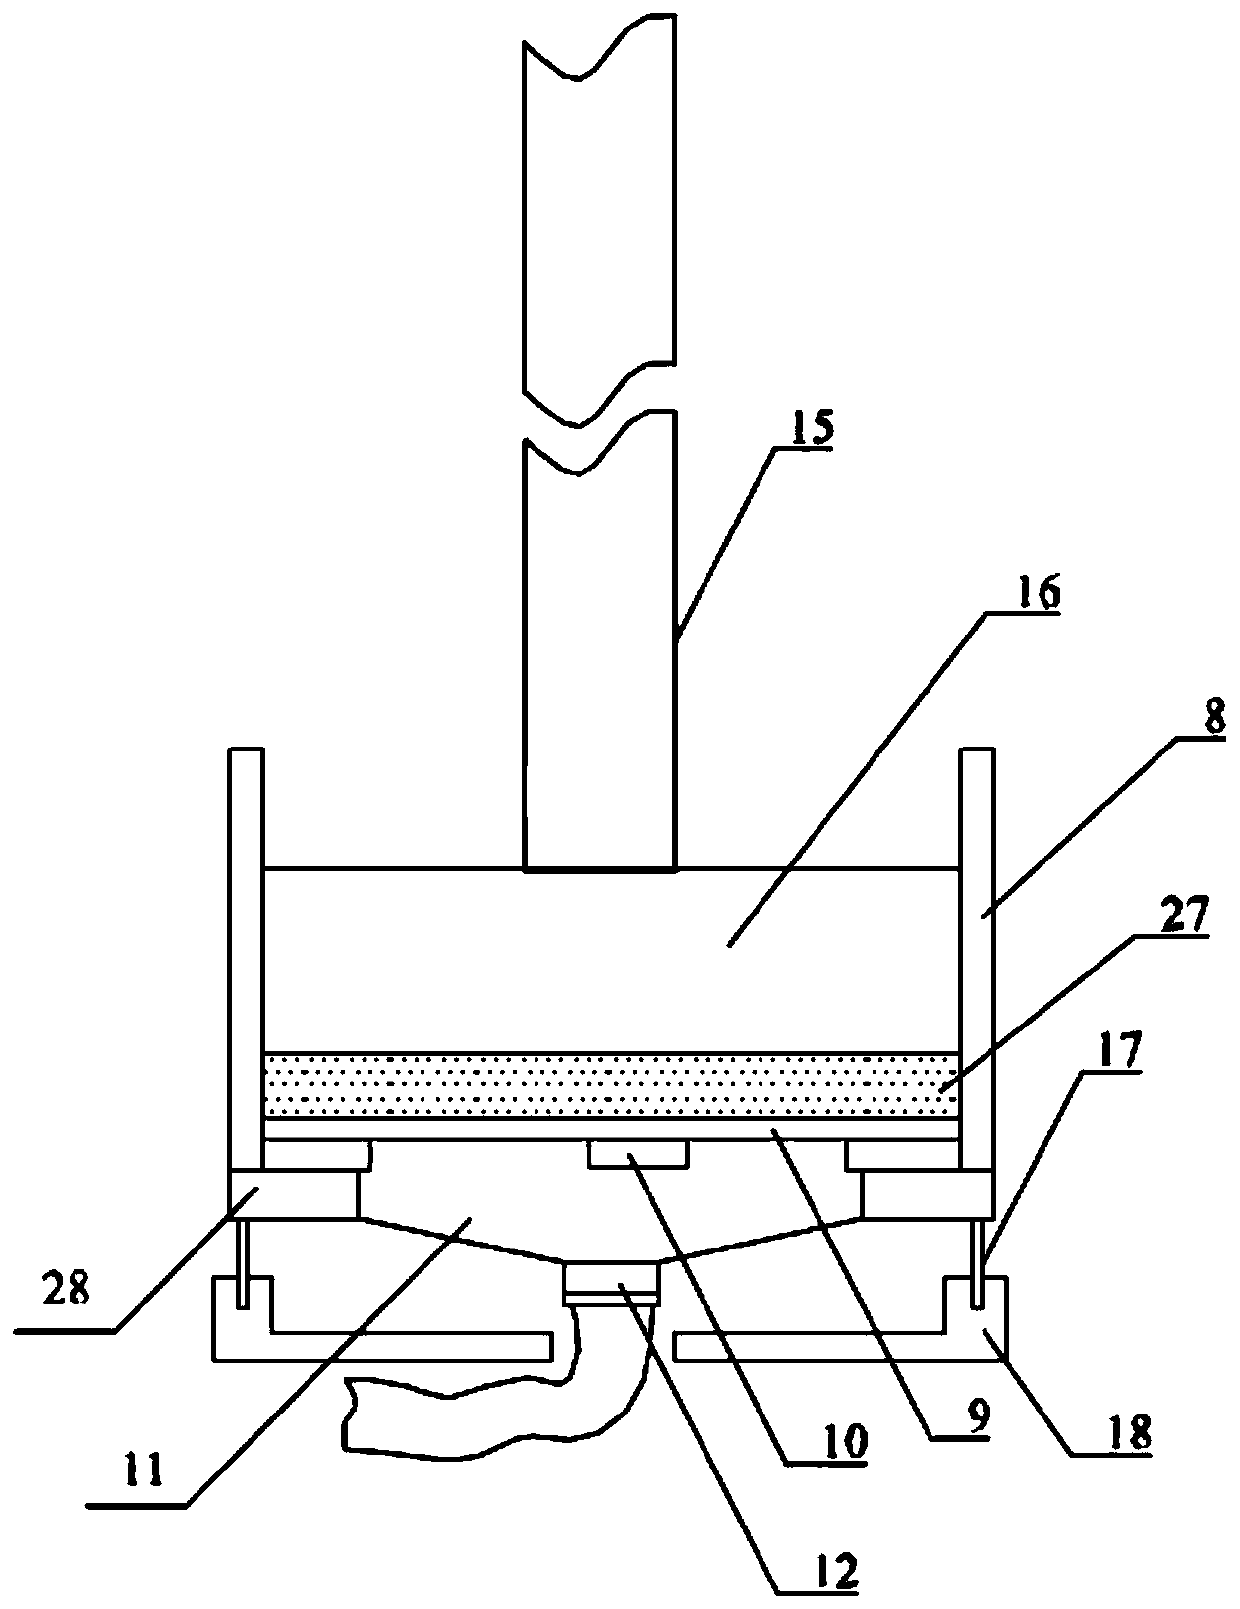 A device for increasing material manufacturing rigid insulation tile body